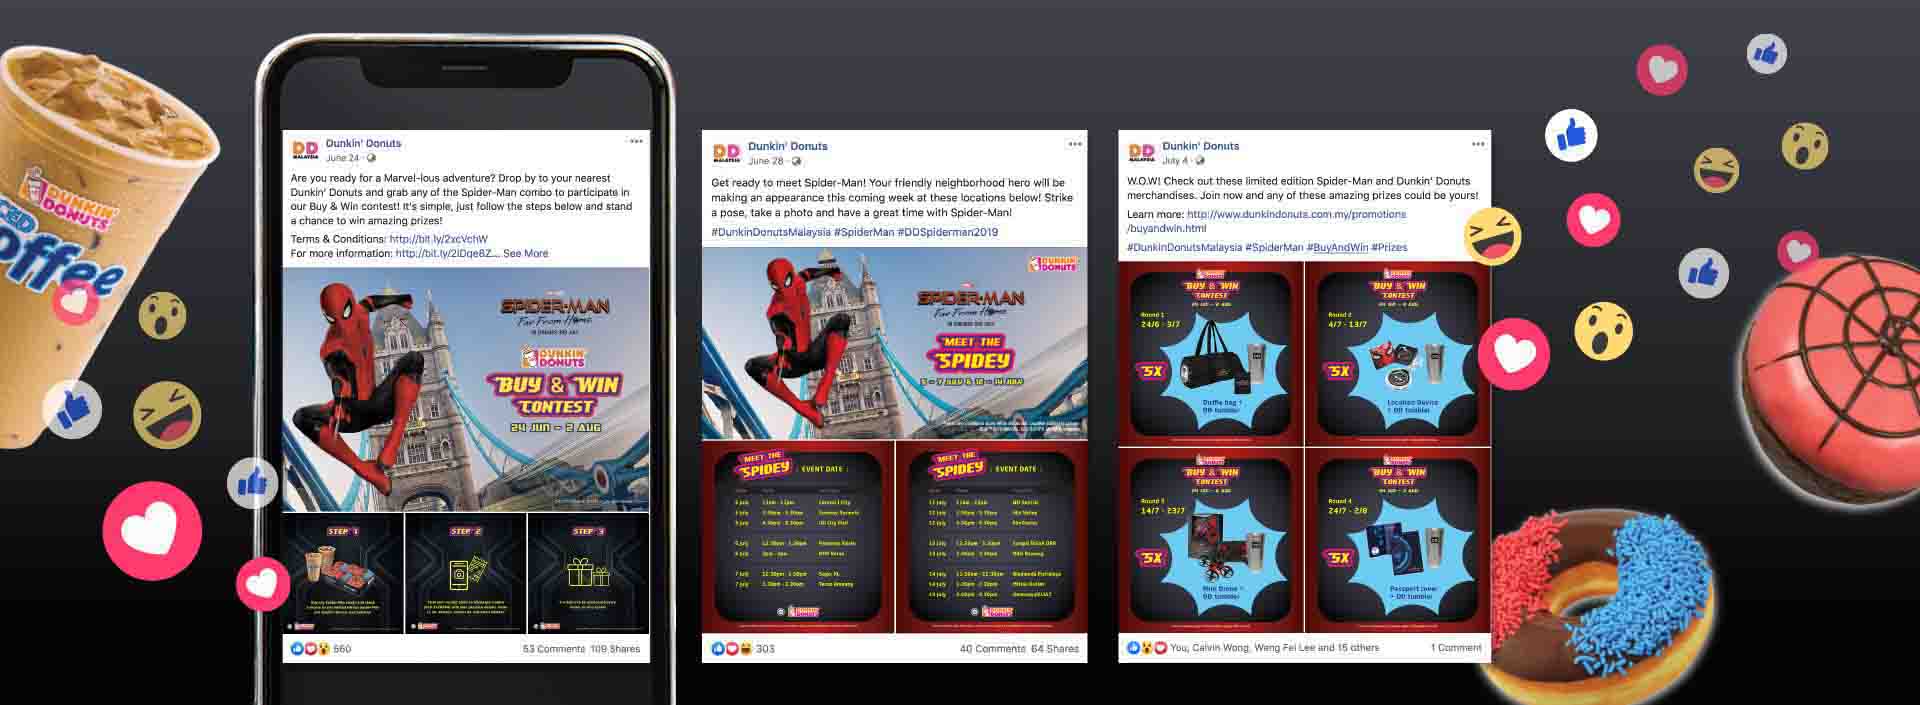 Social media posts showing promotional advertisement of MEET THE SPIDEY by Dunkin’ Donuts with Facebook react buttons and Dunkin’ Donuts products surrounding it